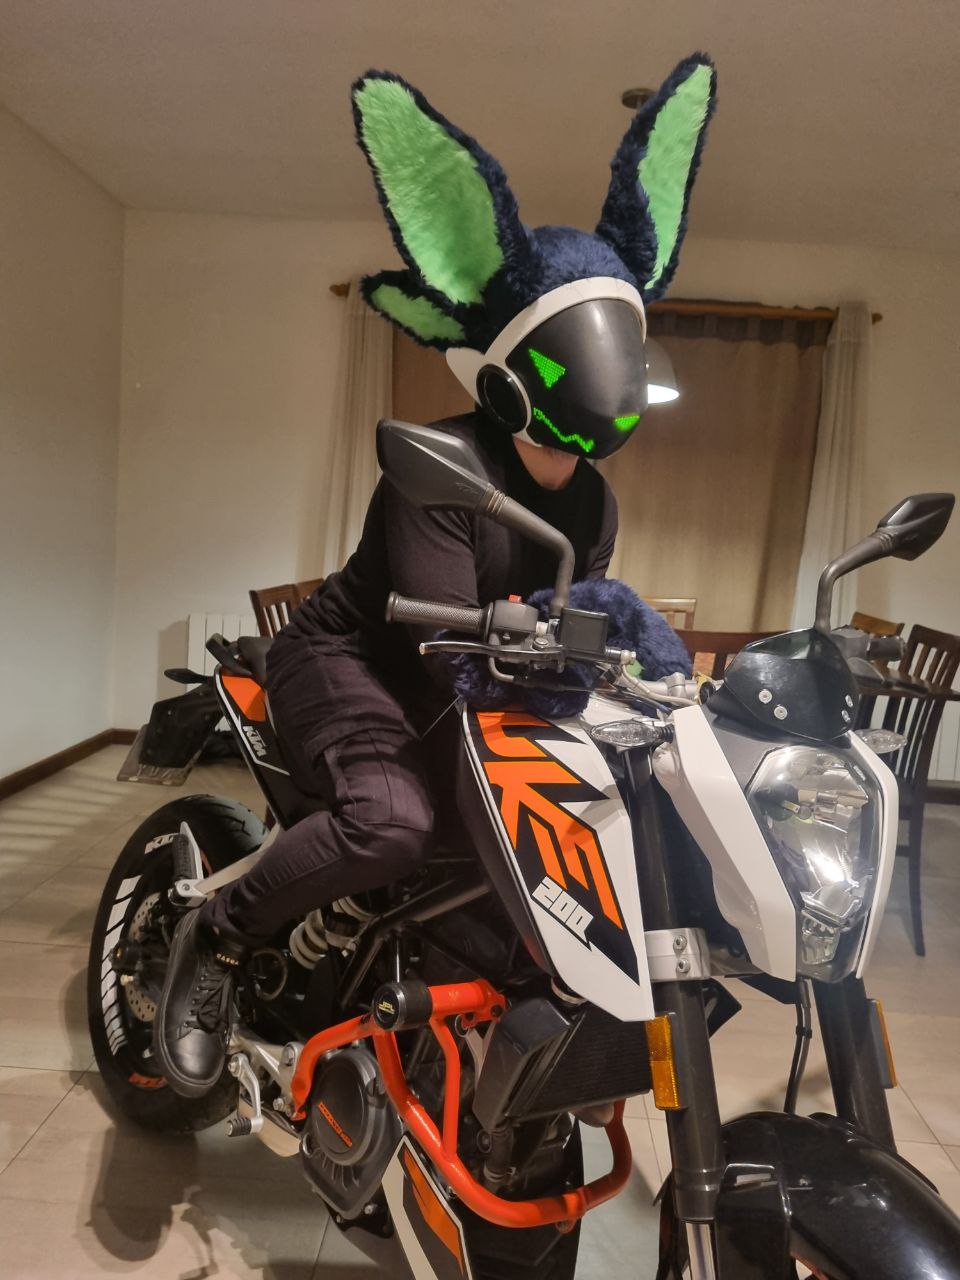 Here is a picture of me with my protogen fursuit at the Avignon